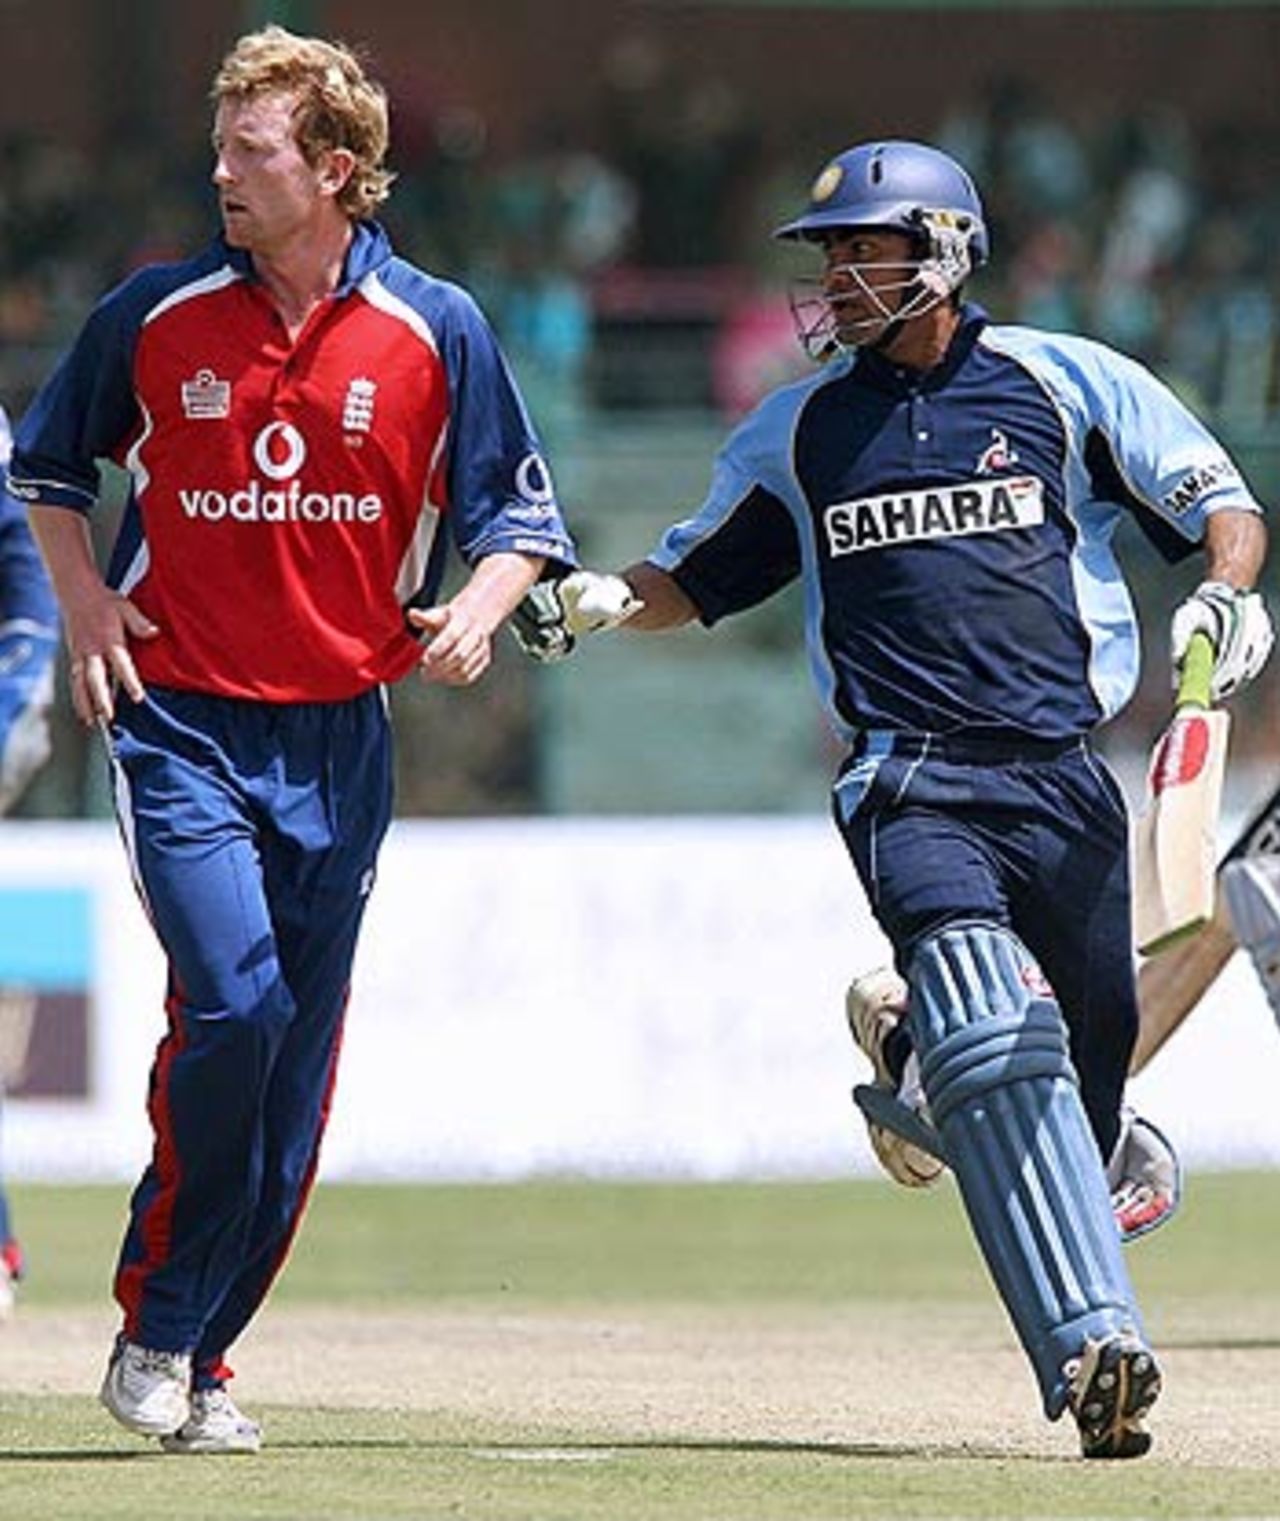 Mohammad Kaif takes a single off Paul Collingwood during the tour match at Jaipur, Rajasthan Cricket Association President's XI v England XI, Jaipur, March 25, 2006